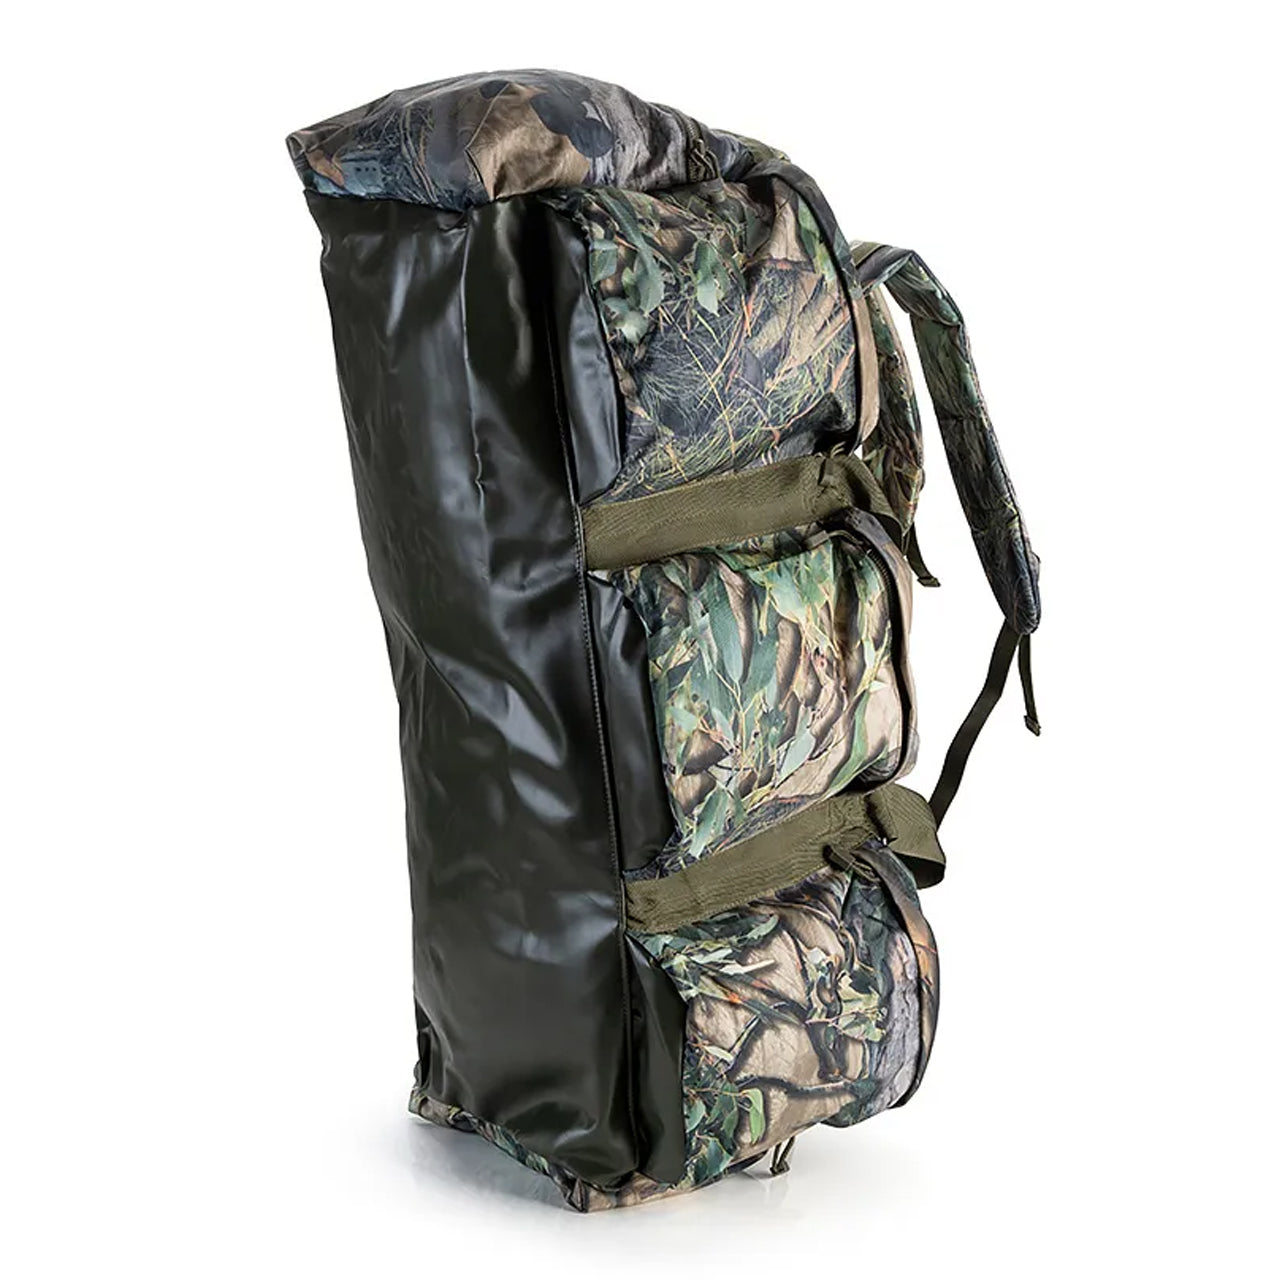 Experience the rugged outdoors with Austealth's Native Camouflage 100L Duffle Bag! Made of 900D Oxford Fabric for superior strength and waterproofing, this bag has everything you need to conquer any terrain. www.defenceqstore.com.au